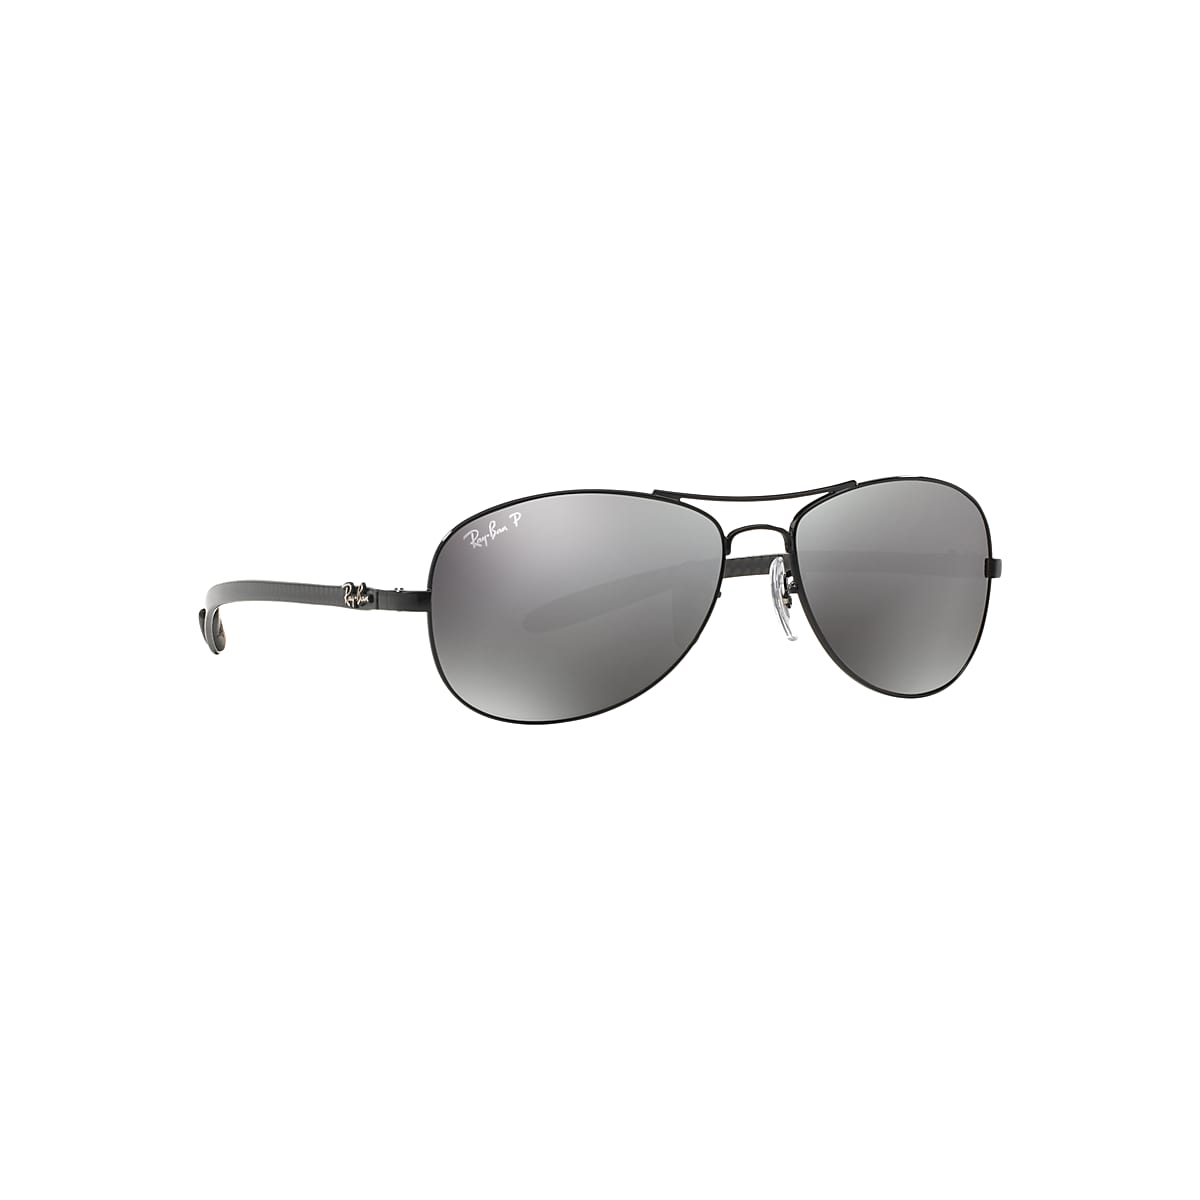 Rb8301 Sunglasses in Black and Grey | Ray-Ban®